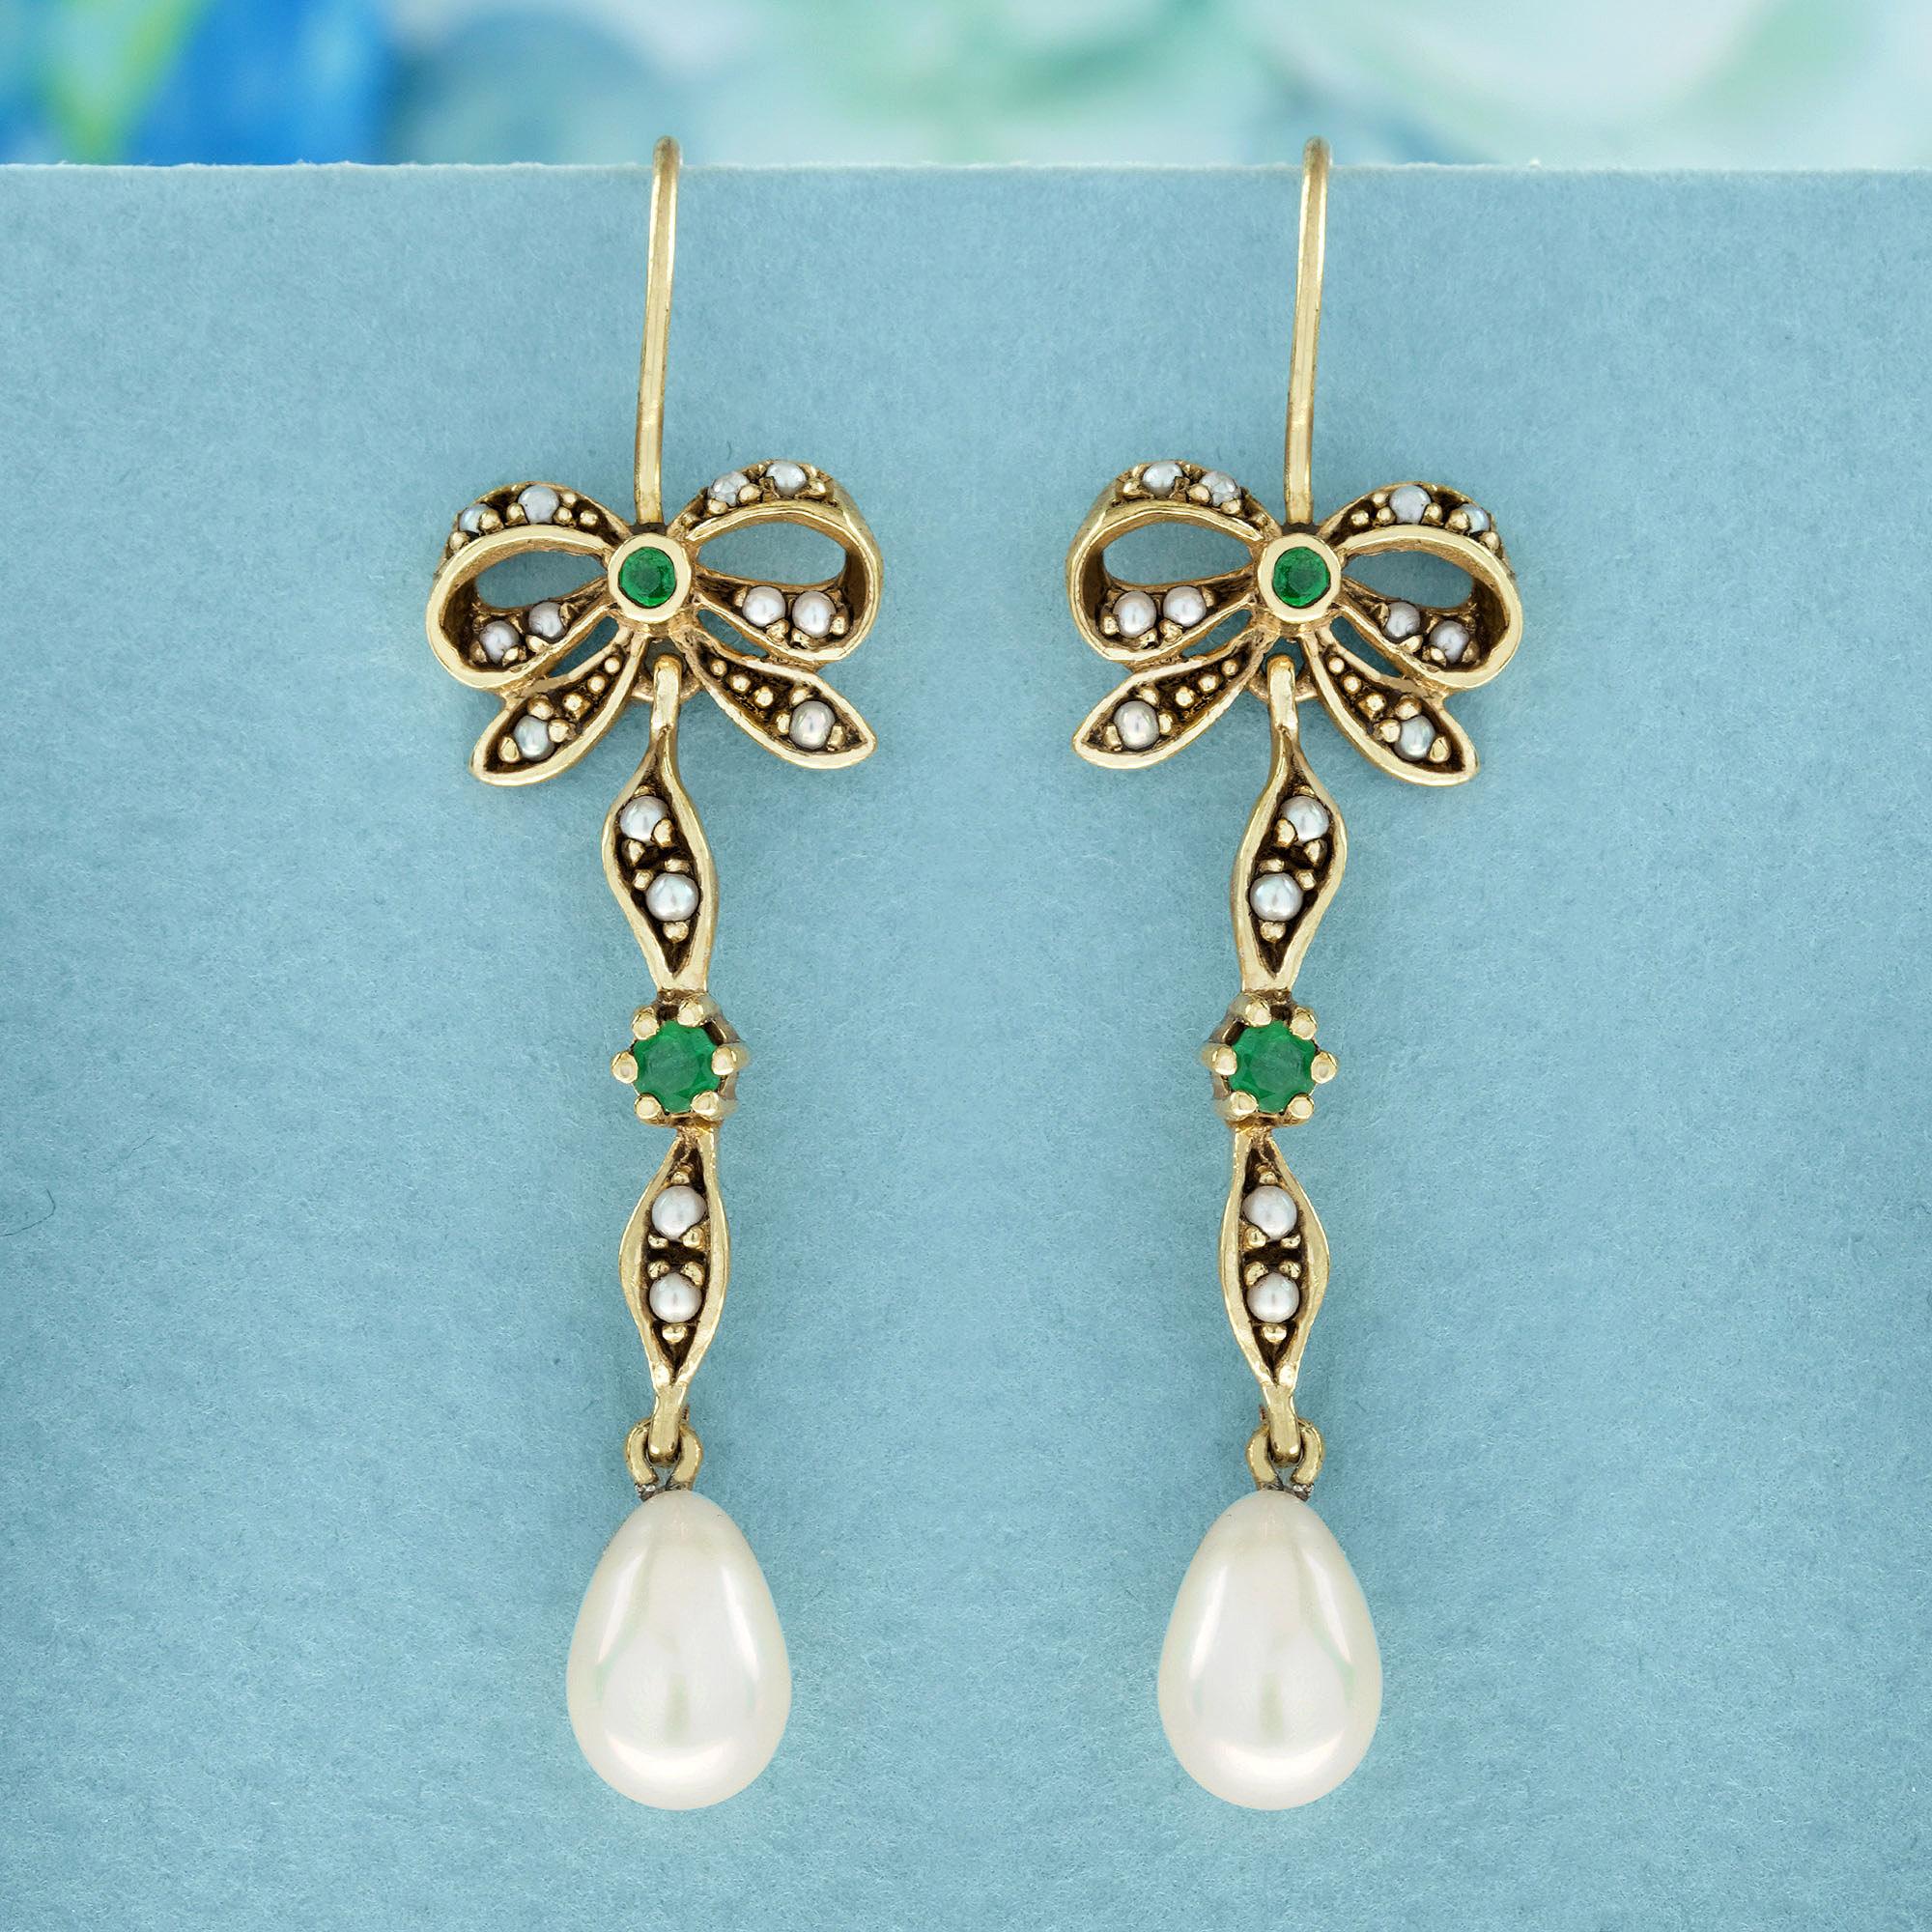 These earrings boast a vintage-inspired design adorned with delicate gold bows. Enhanced with sparkling milgrain details, the pearls gracefully align along the bow tie, culminating in a sizable, elegant white drop at the base to imbue movement and